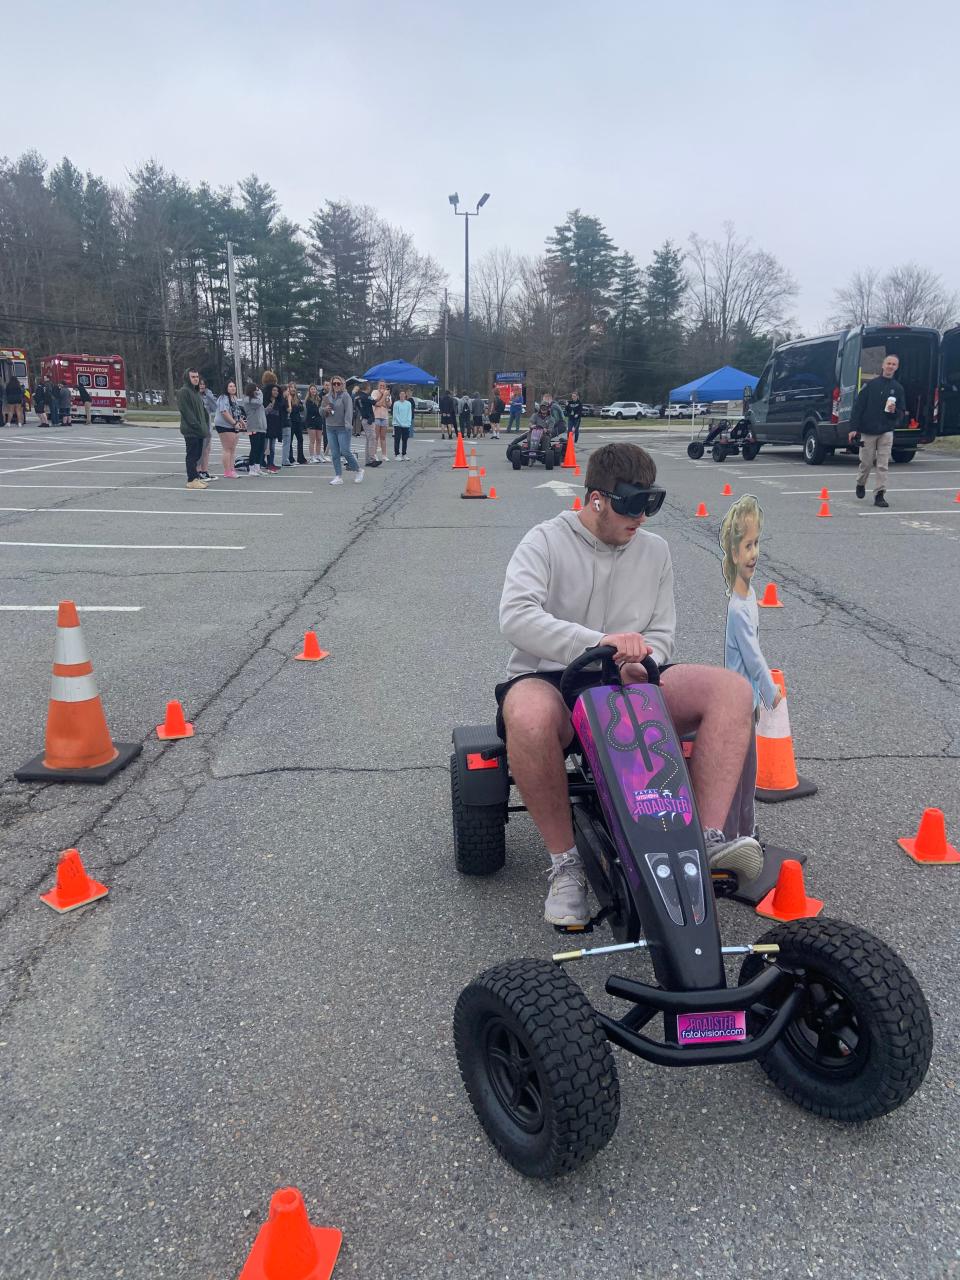 Sean Kelly, a junior at Narragansett Regional High School, attempts to navigate a go-cart while wearing vision-impairment goggles at the school's annual "Gansett Arrives Alive Program" on Thursday, May 2.